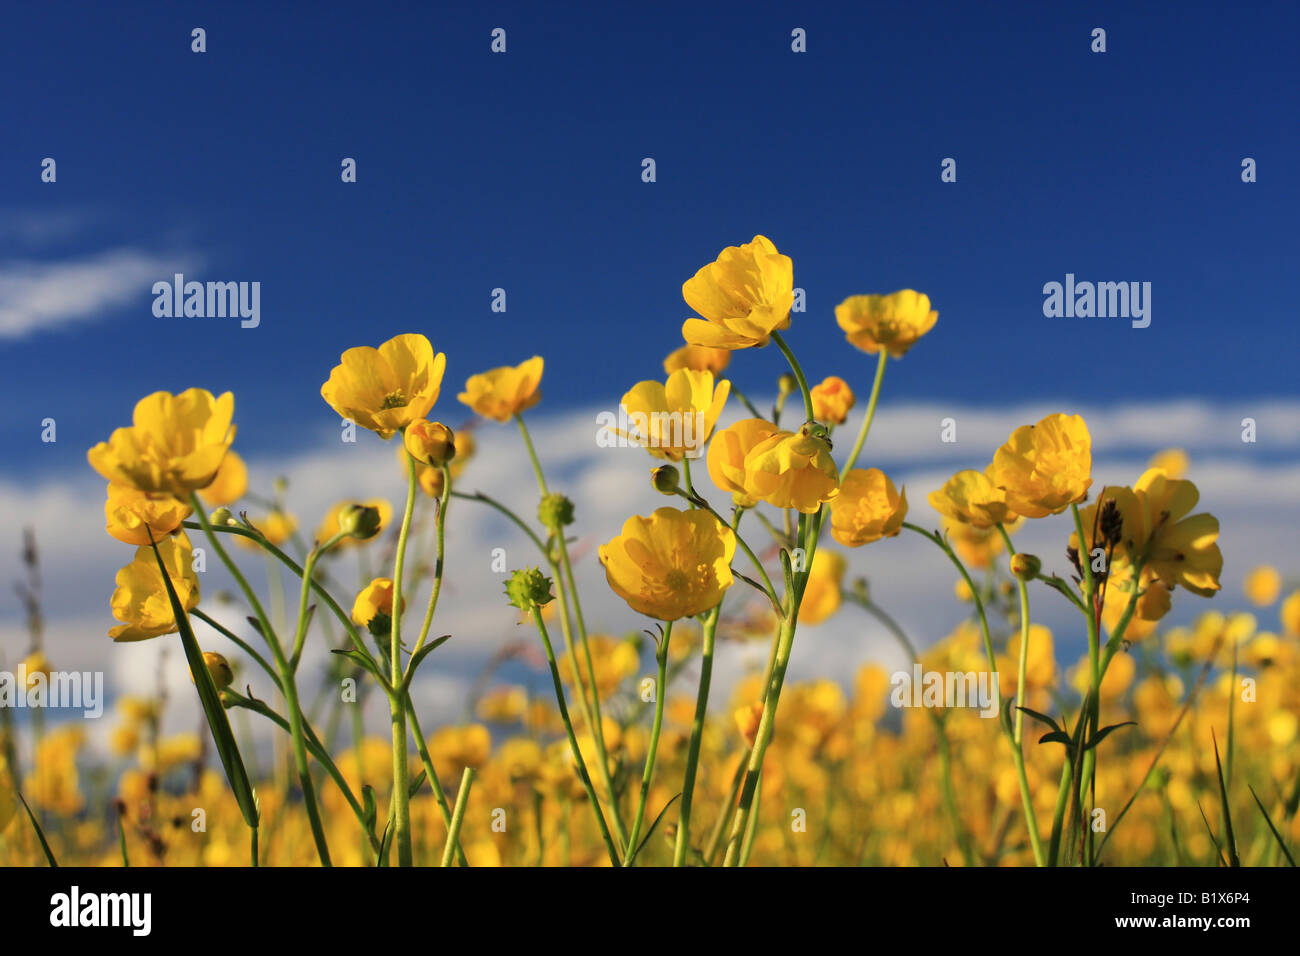 yellow buttercup flowers against a deep blue sky shot in the setting sun very saturated colors and warm summerfeel Stock Photo